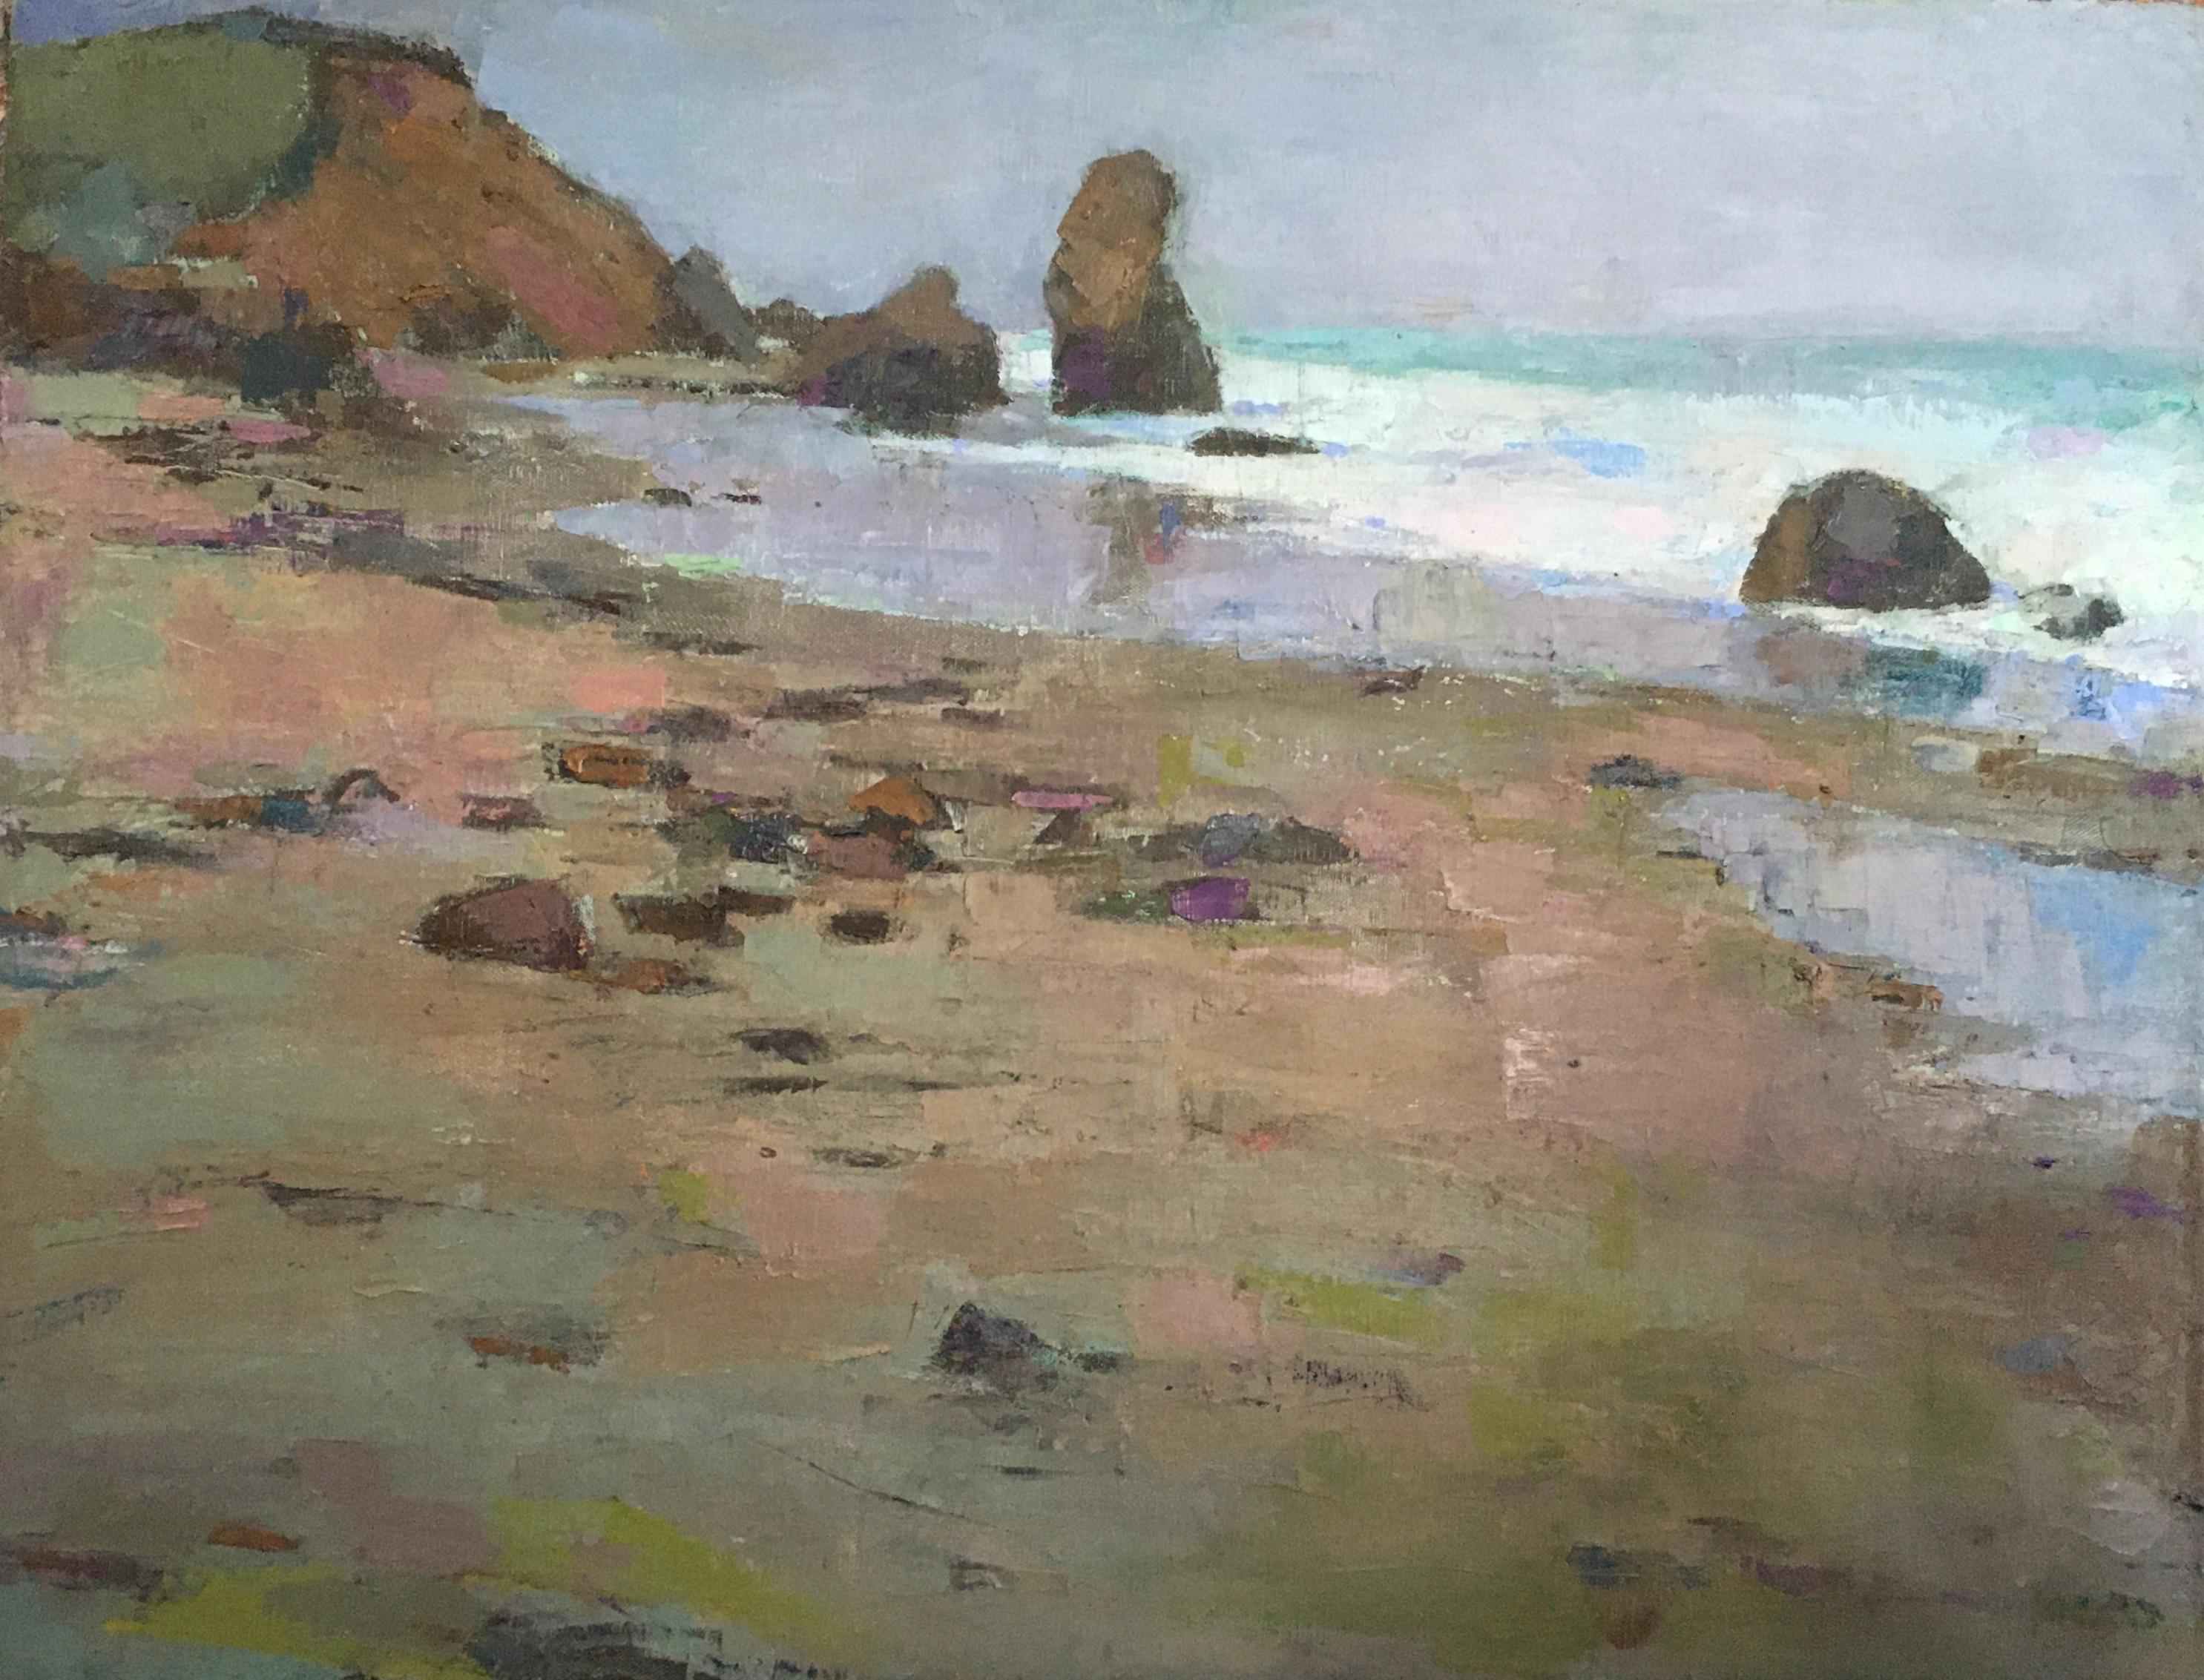 Larry Horowitz Landscape Painting - "Lucy Vincent" oil painting of Martha's Vineyard Beach and cliffs earth tones